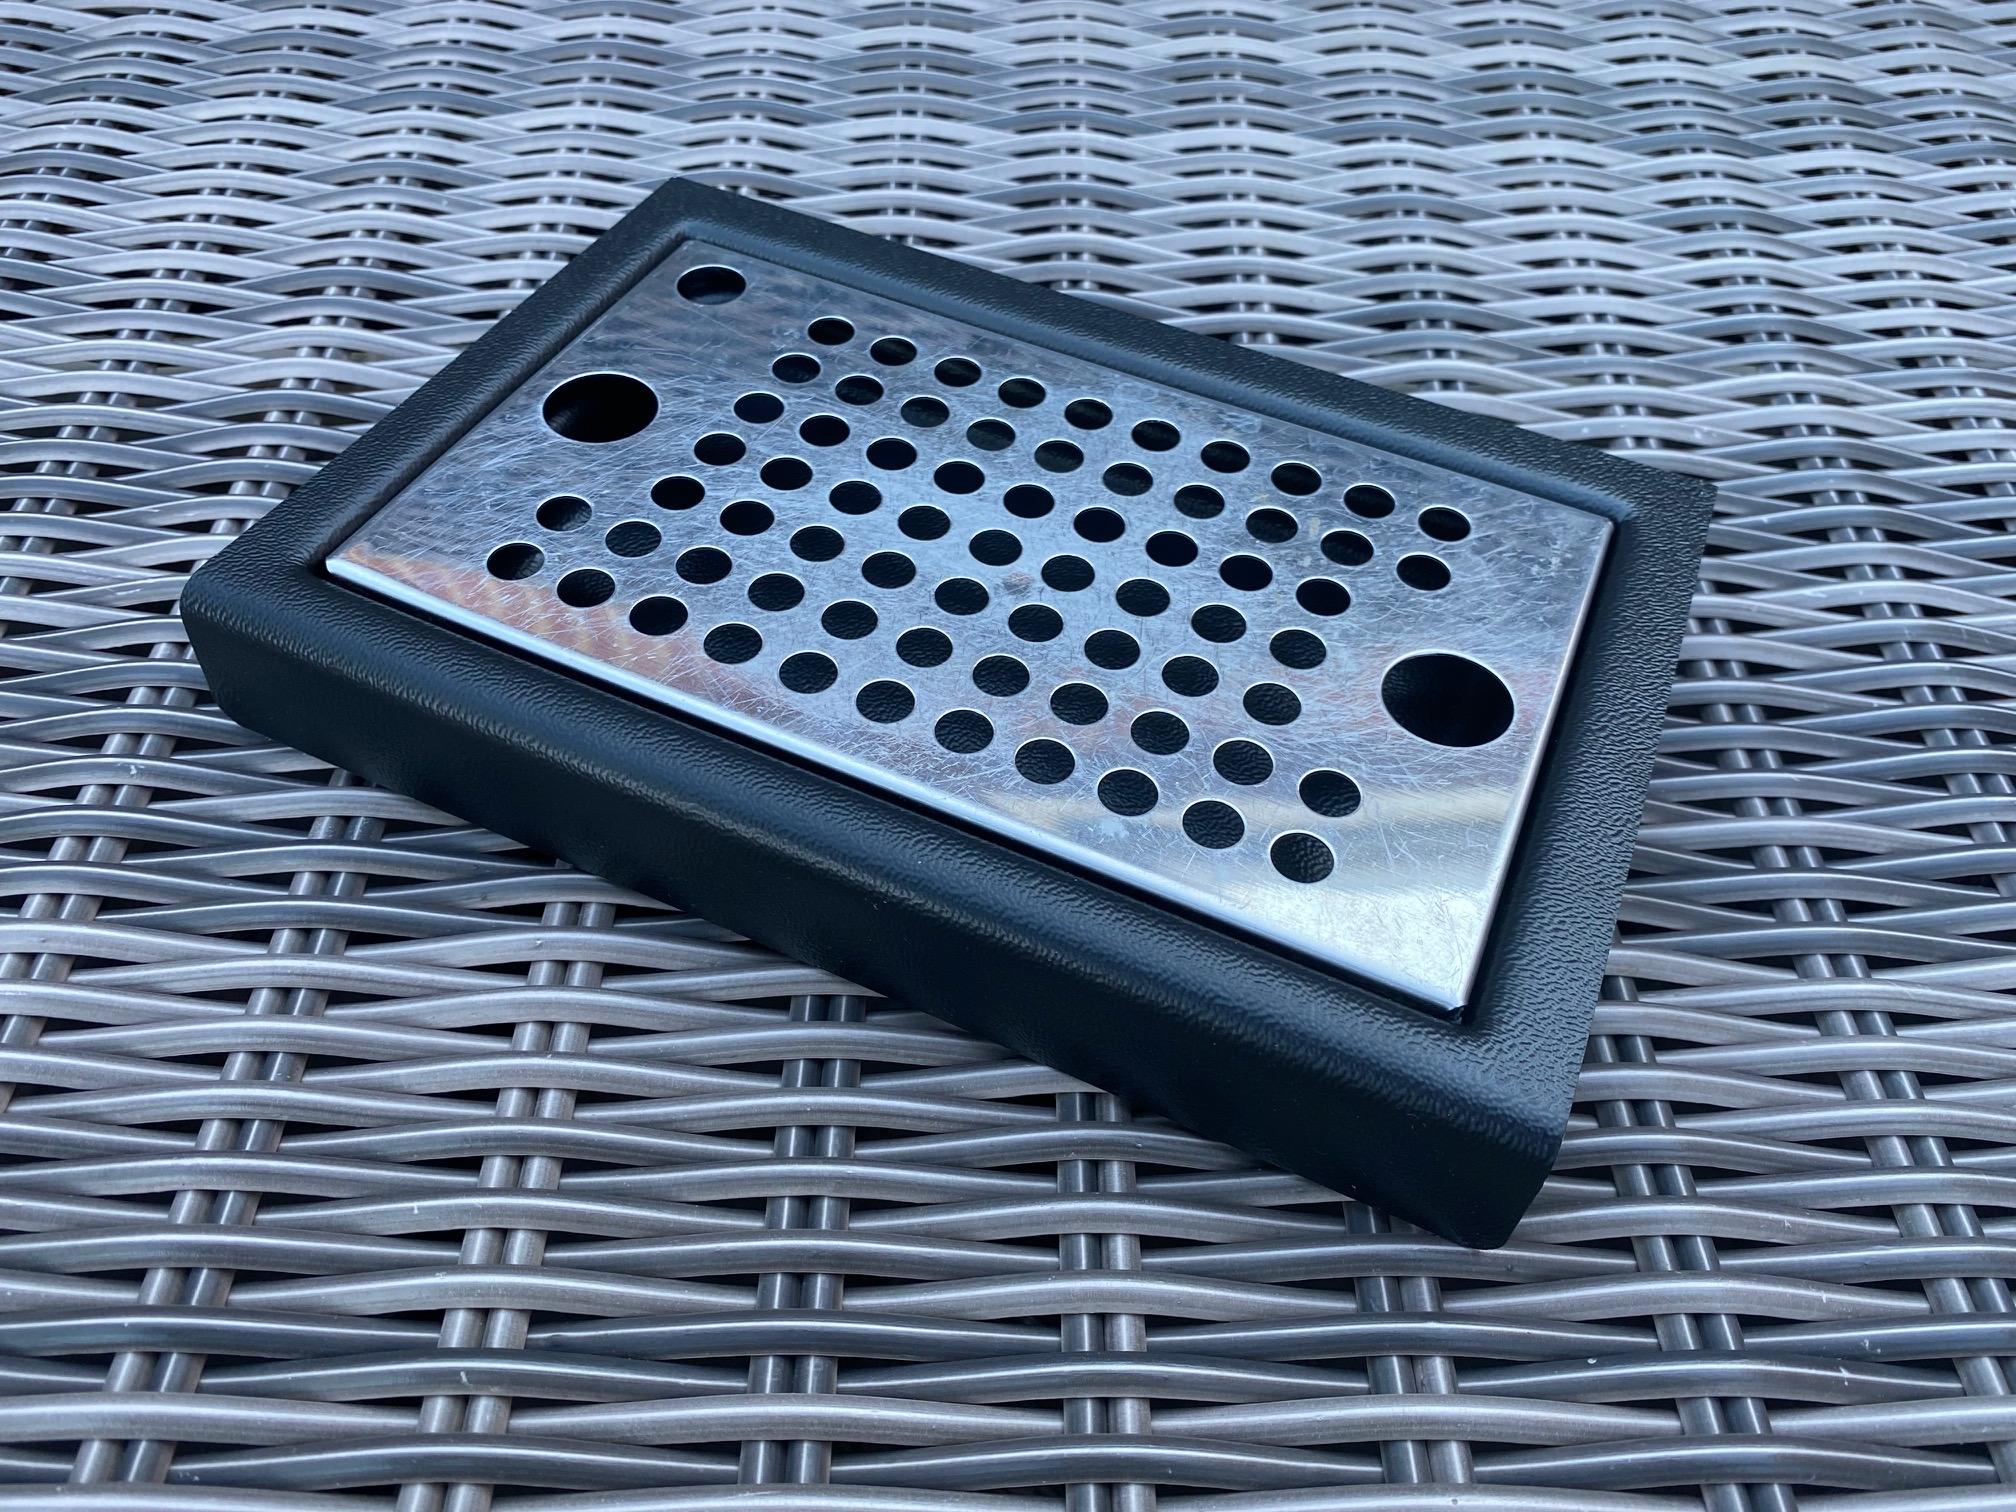 Drip tray with grille